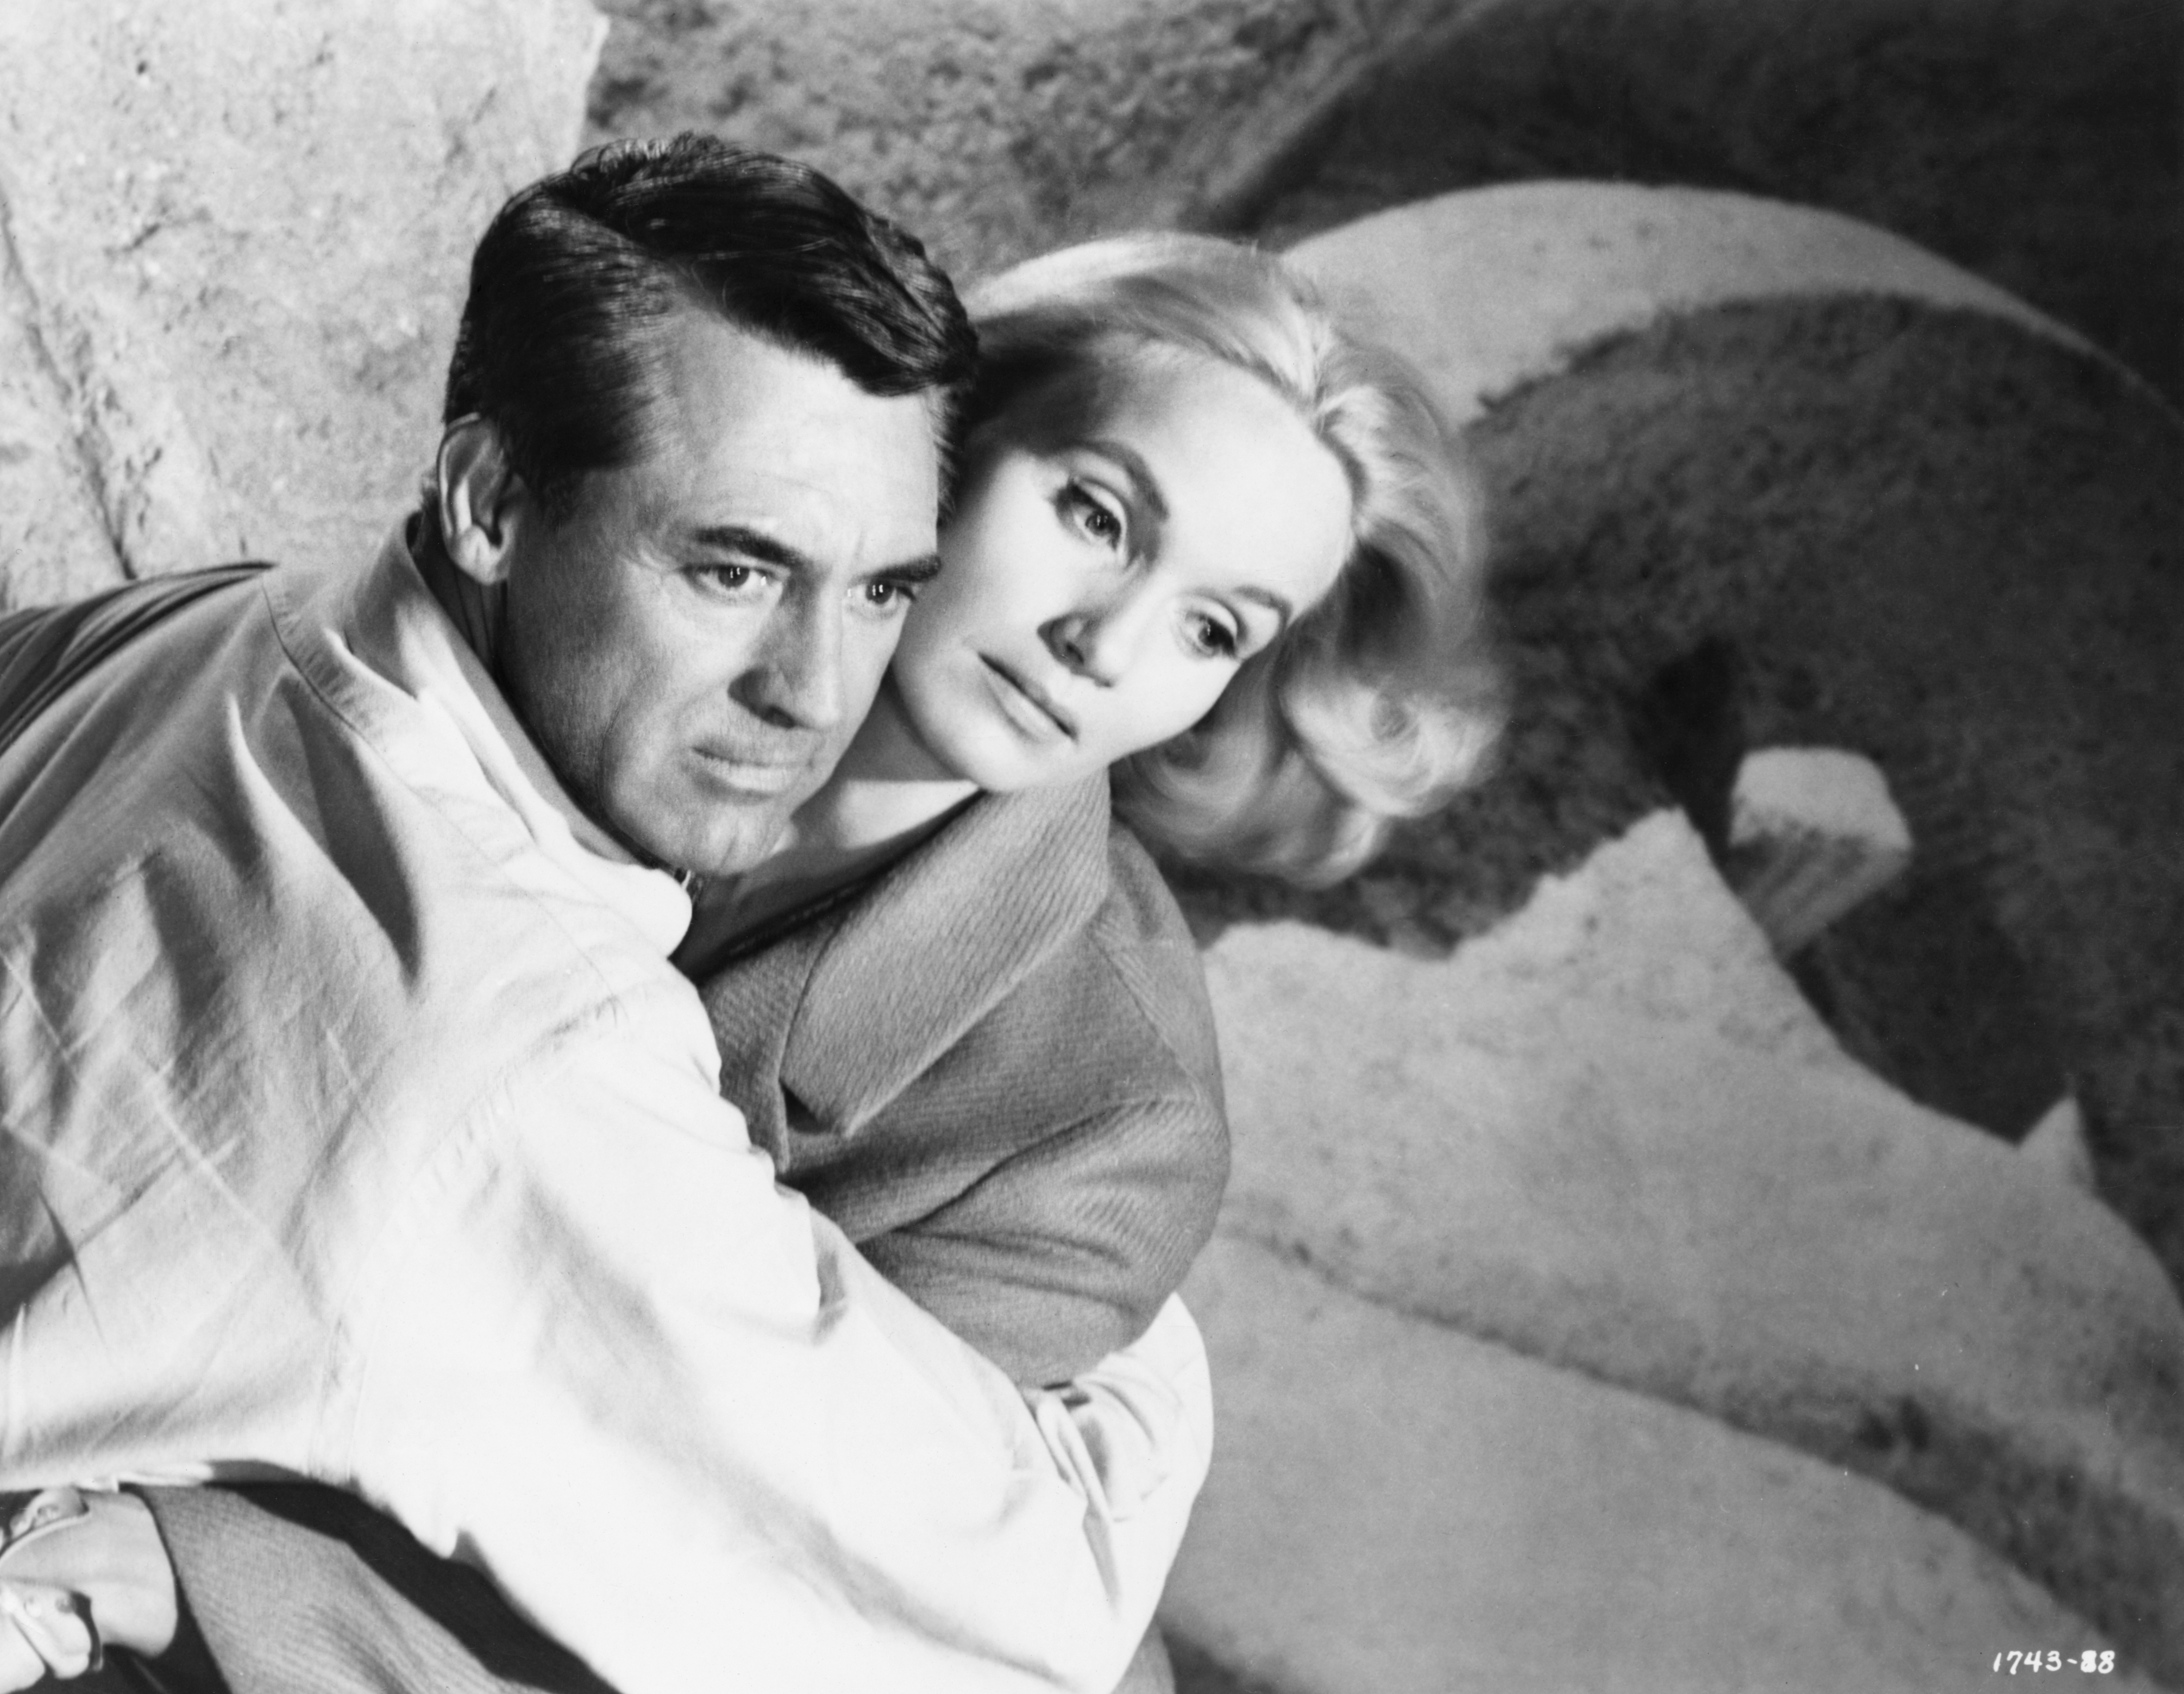 Cary Grant and Eva Marie Saint in a scene from "North by Northwest" in 1959 | Source: Getty Images